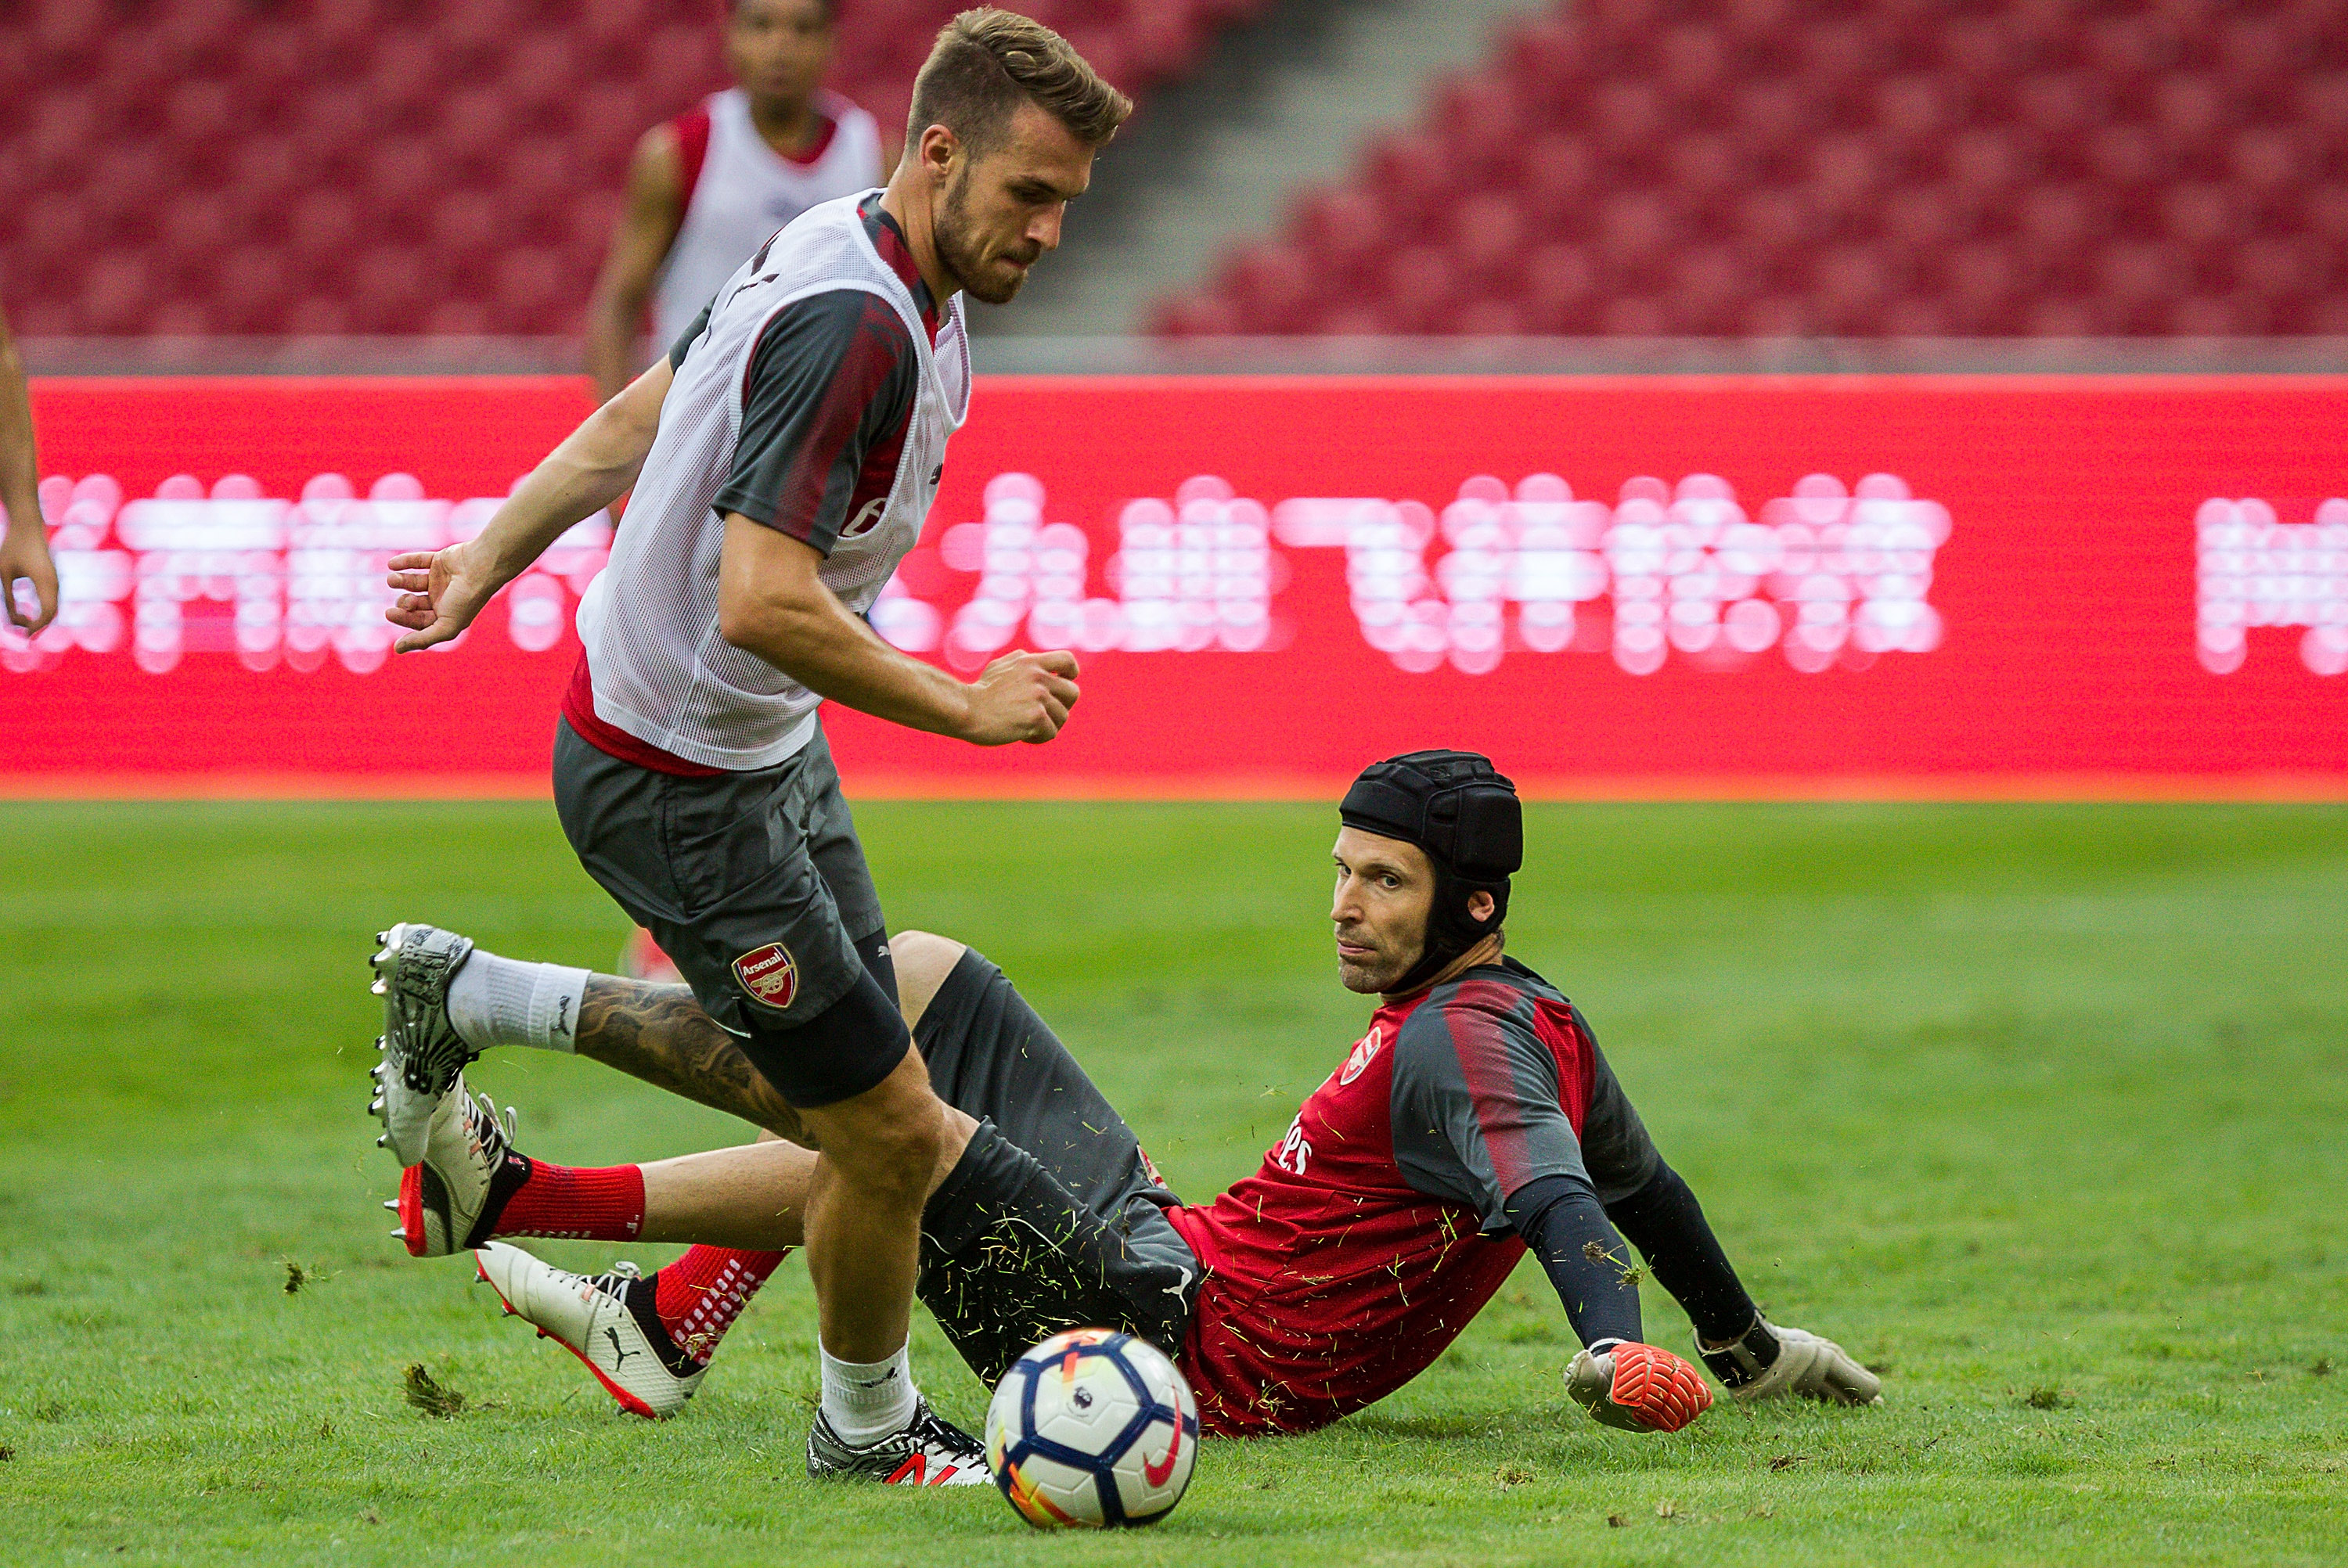 BEIJING, CHINA - JULY 21:  Aaron Ramsey goes past Petr Cech of Arsenal during a training session at Birds Nest on July 21, 2017 in Beijing, China.  (Photo by Yifan Ding/Getty Images)